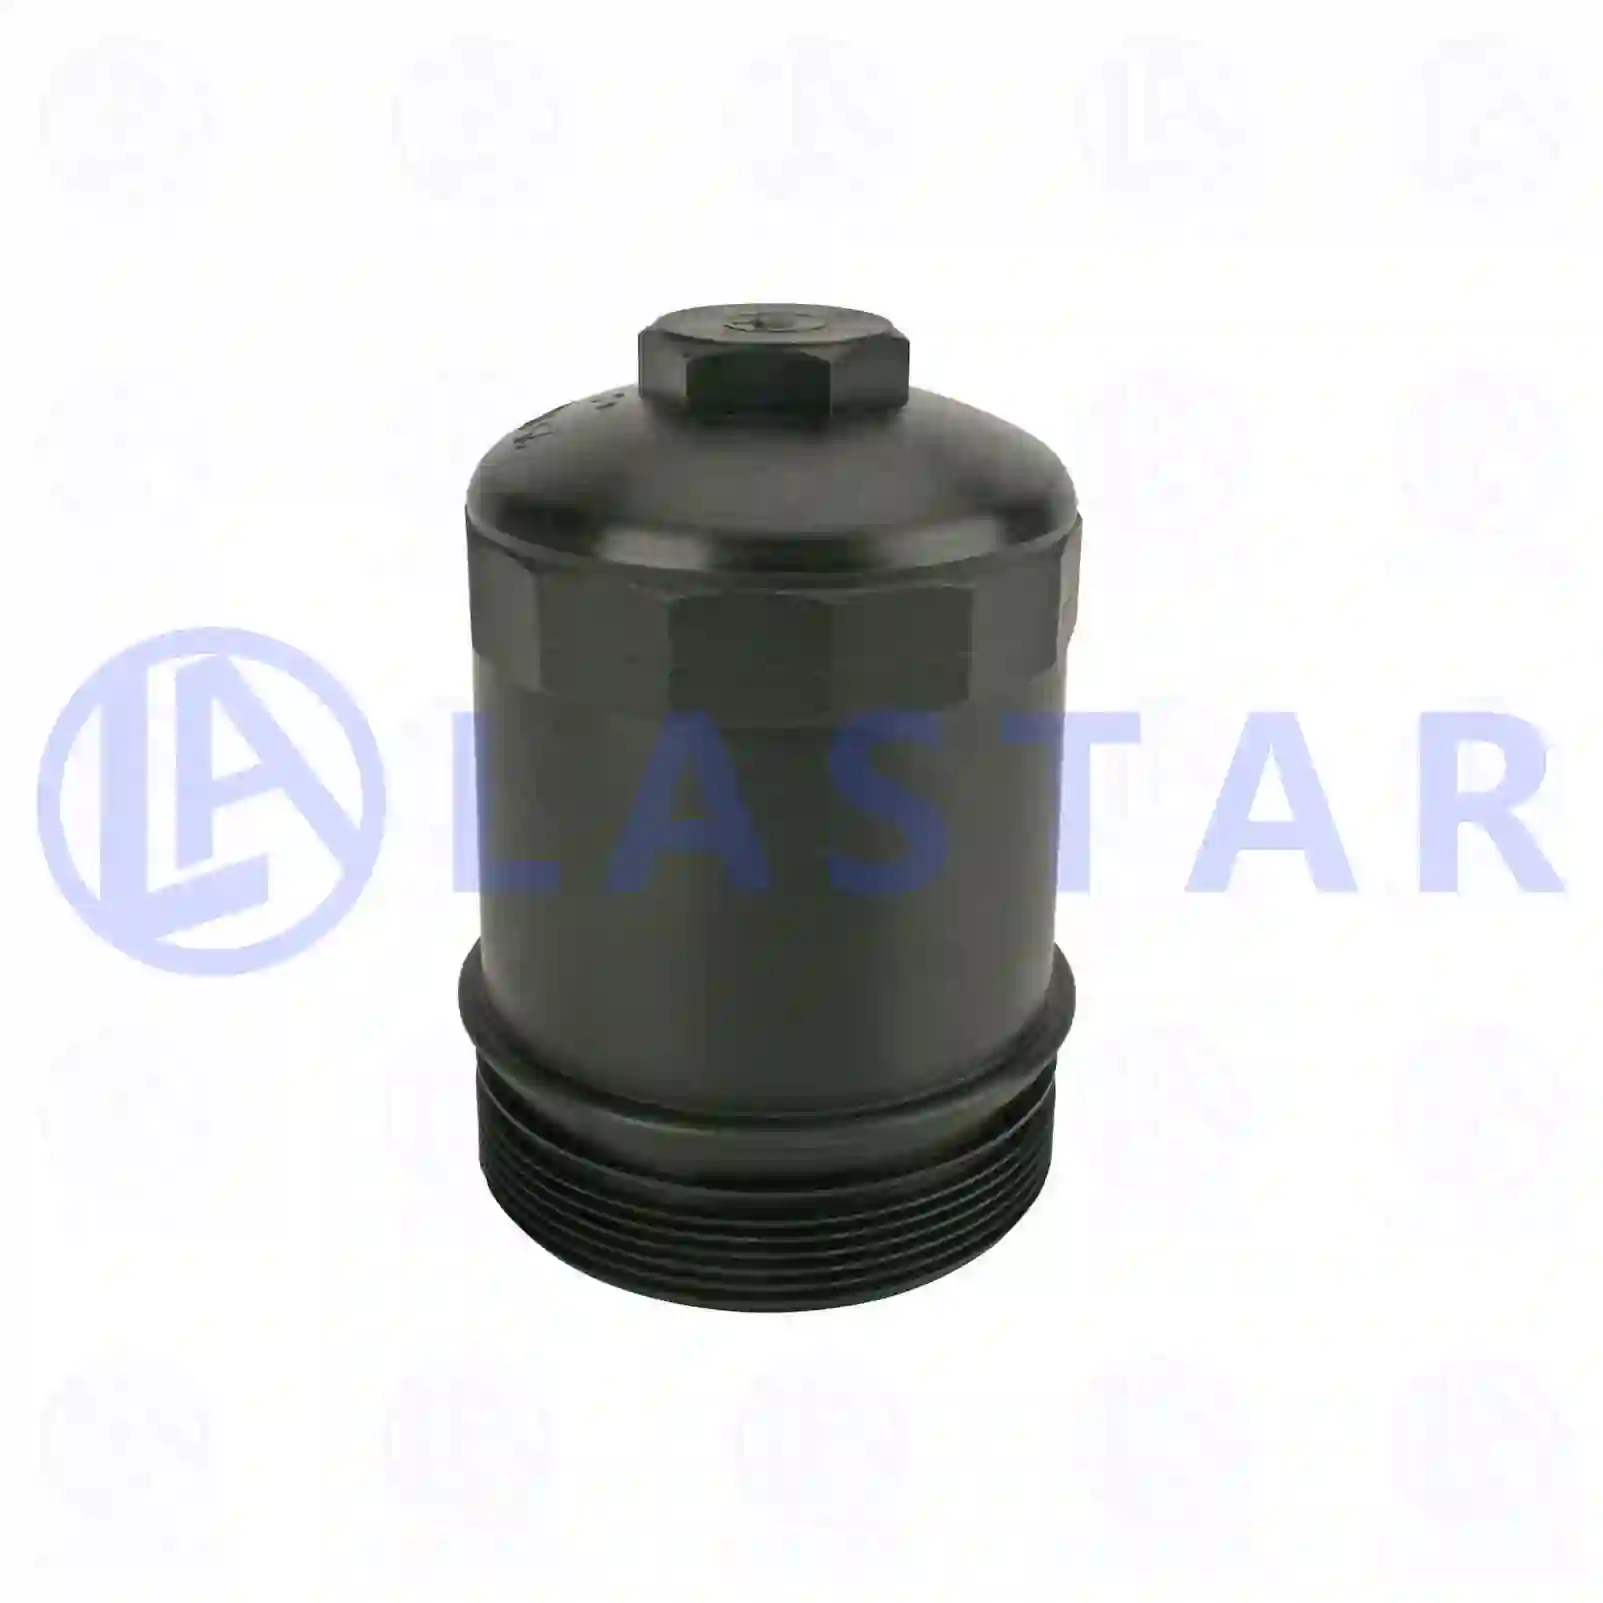 Oil filter cover, 77702053, 0001802438, , , ||  77702053 Lastar Spare Part | Truck Spare Parts, Auotomotive Spare Parts Oil filter cover, 77702053, 0001802438, , , ||  77702053 Lastar Spare Part | Truck Spare Parts, Auotomotive Spare Parts